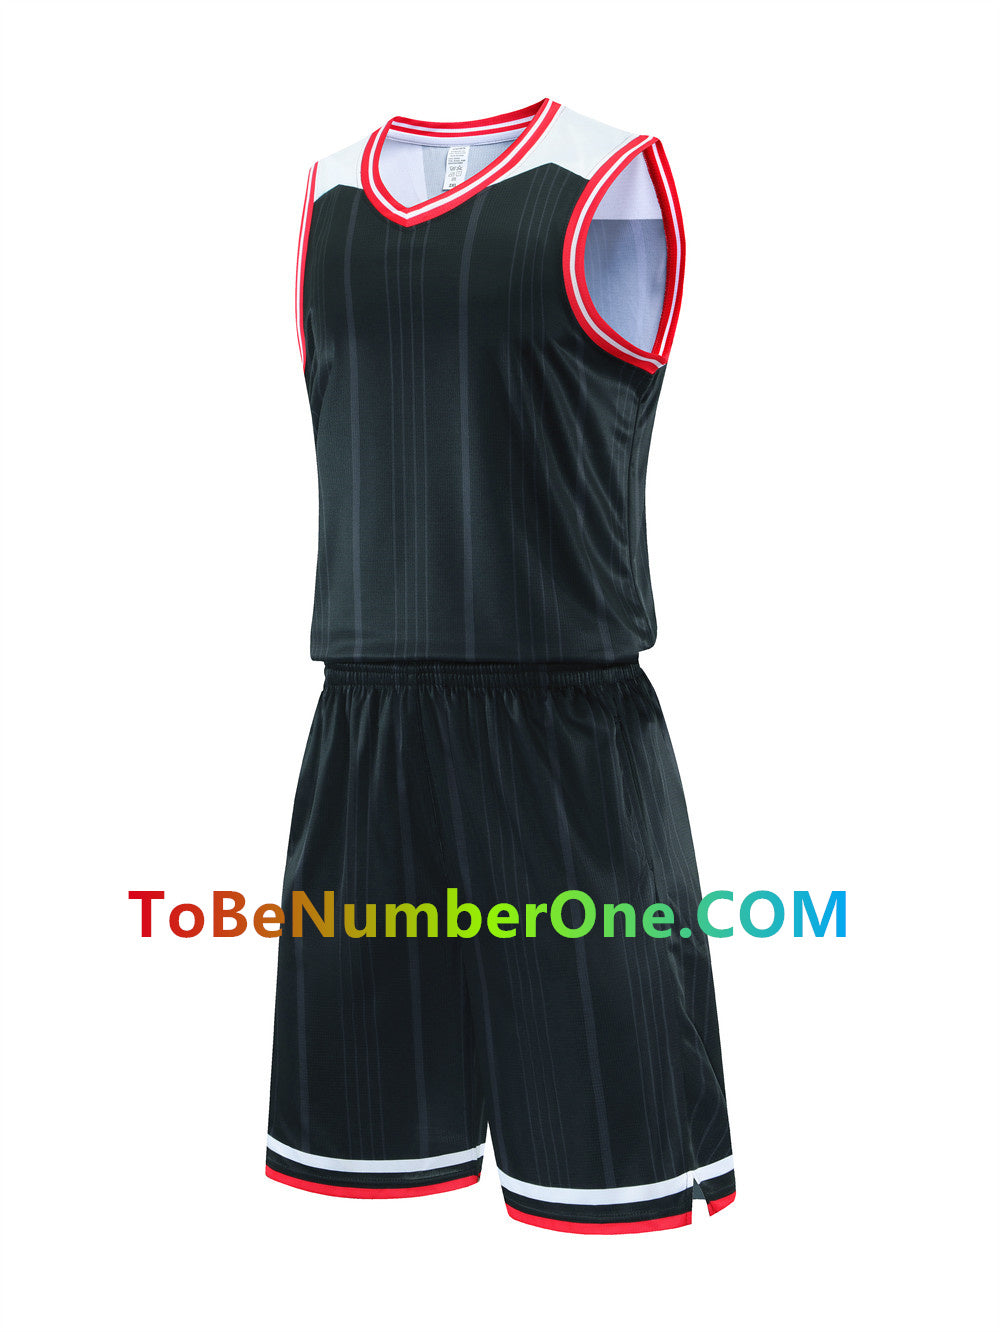 Customize instock High Quality Quick-drying basketball uniforms print with team name , player and number.  jerseys&shorts with pocket 232#